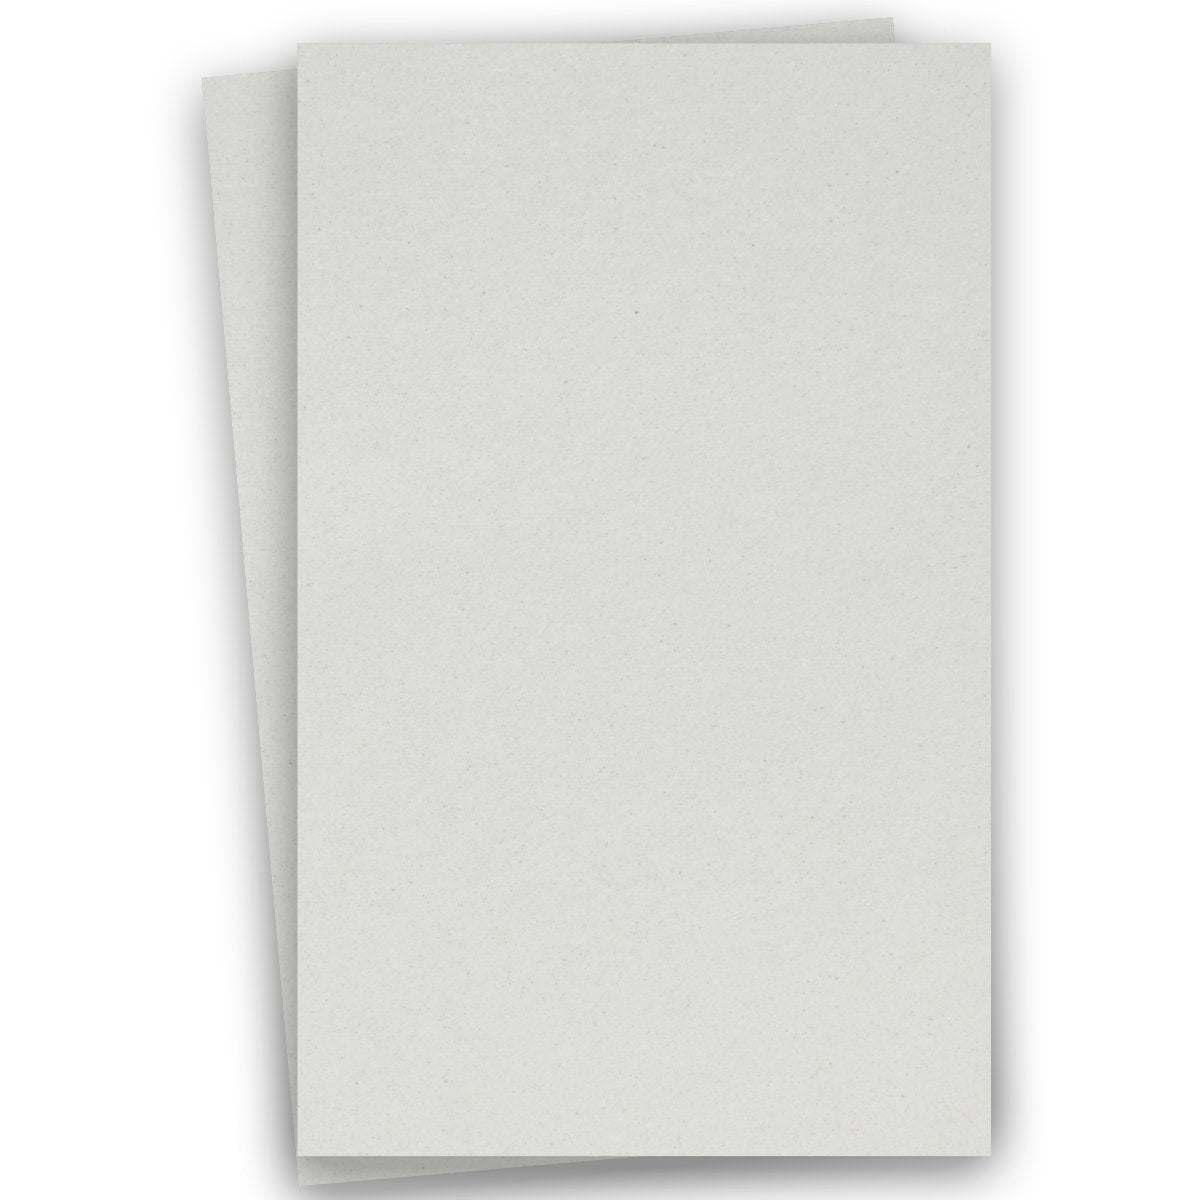 Popular WHIP CREAM 11X17 (Ledger) Paper 28T Lightweight Multi-use - 250 PK  -- Econo 11-x-17 Ledger size Everyday Paper - Professionals, Designers,  Crafters and DIY Projects 